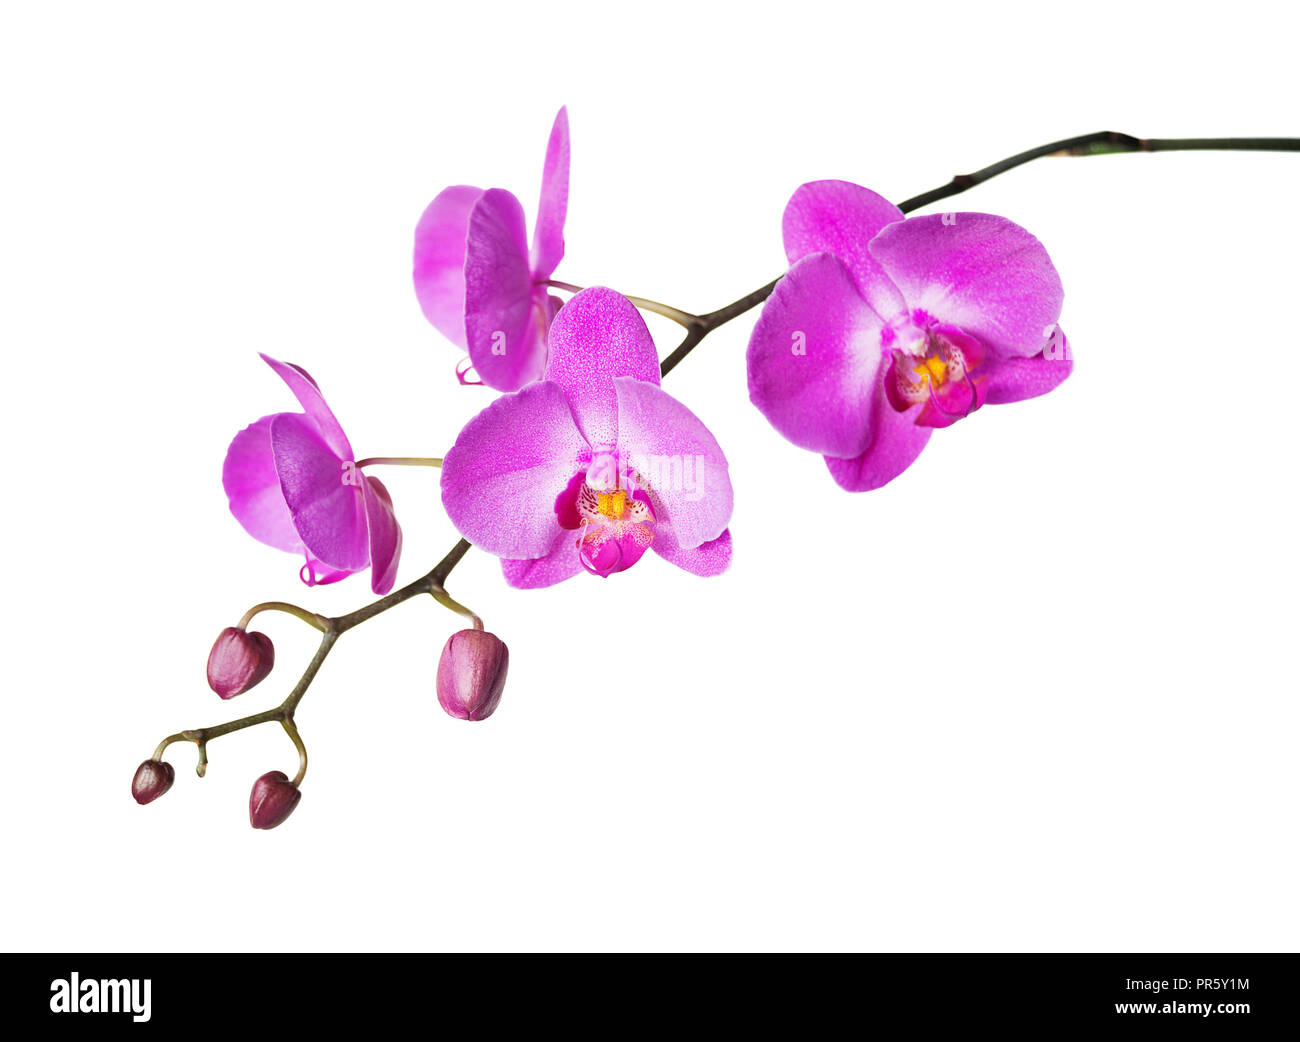 Pink flower of a phalaenopsis orchid with several buds on a branch, isolated on a white background Stock Photo